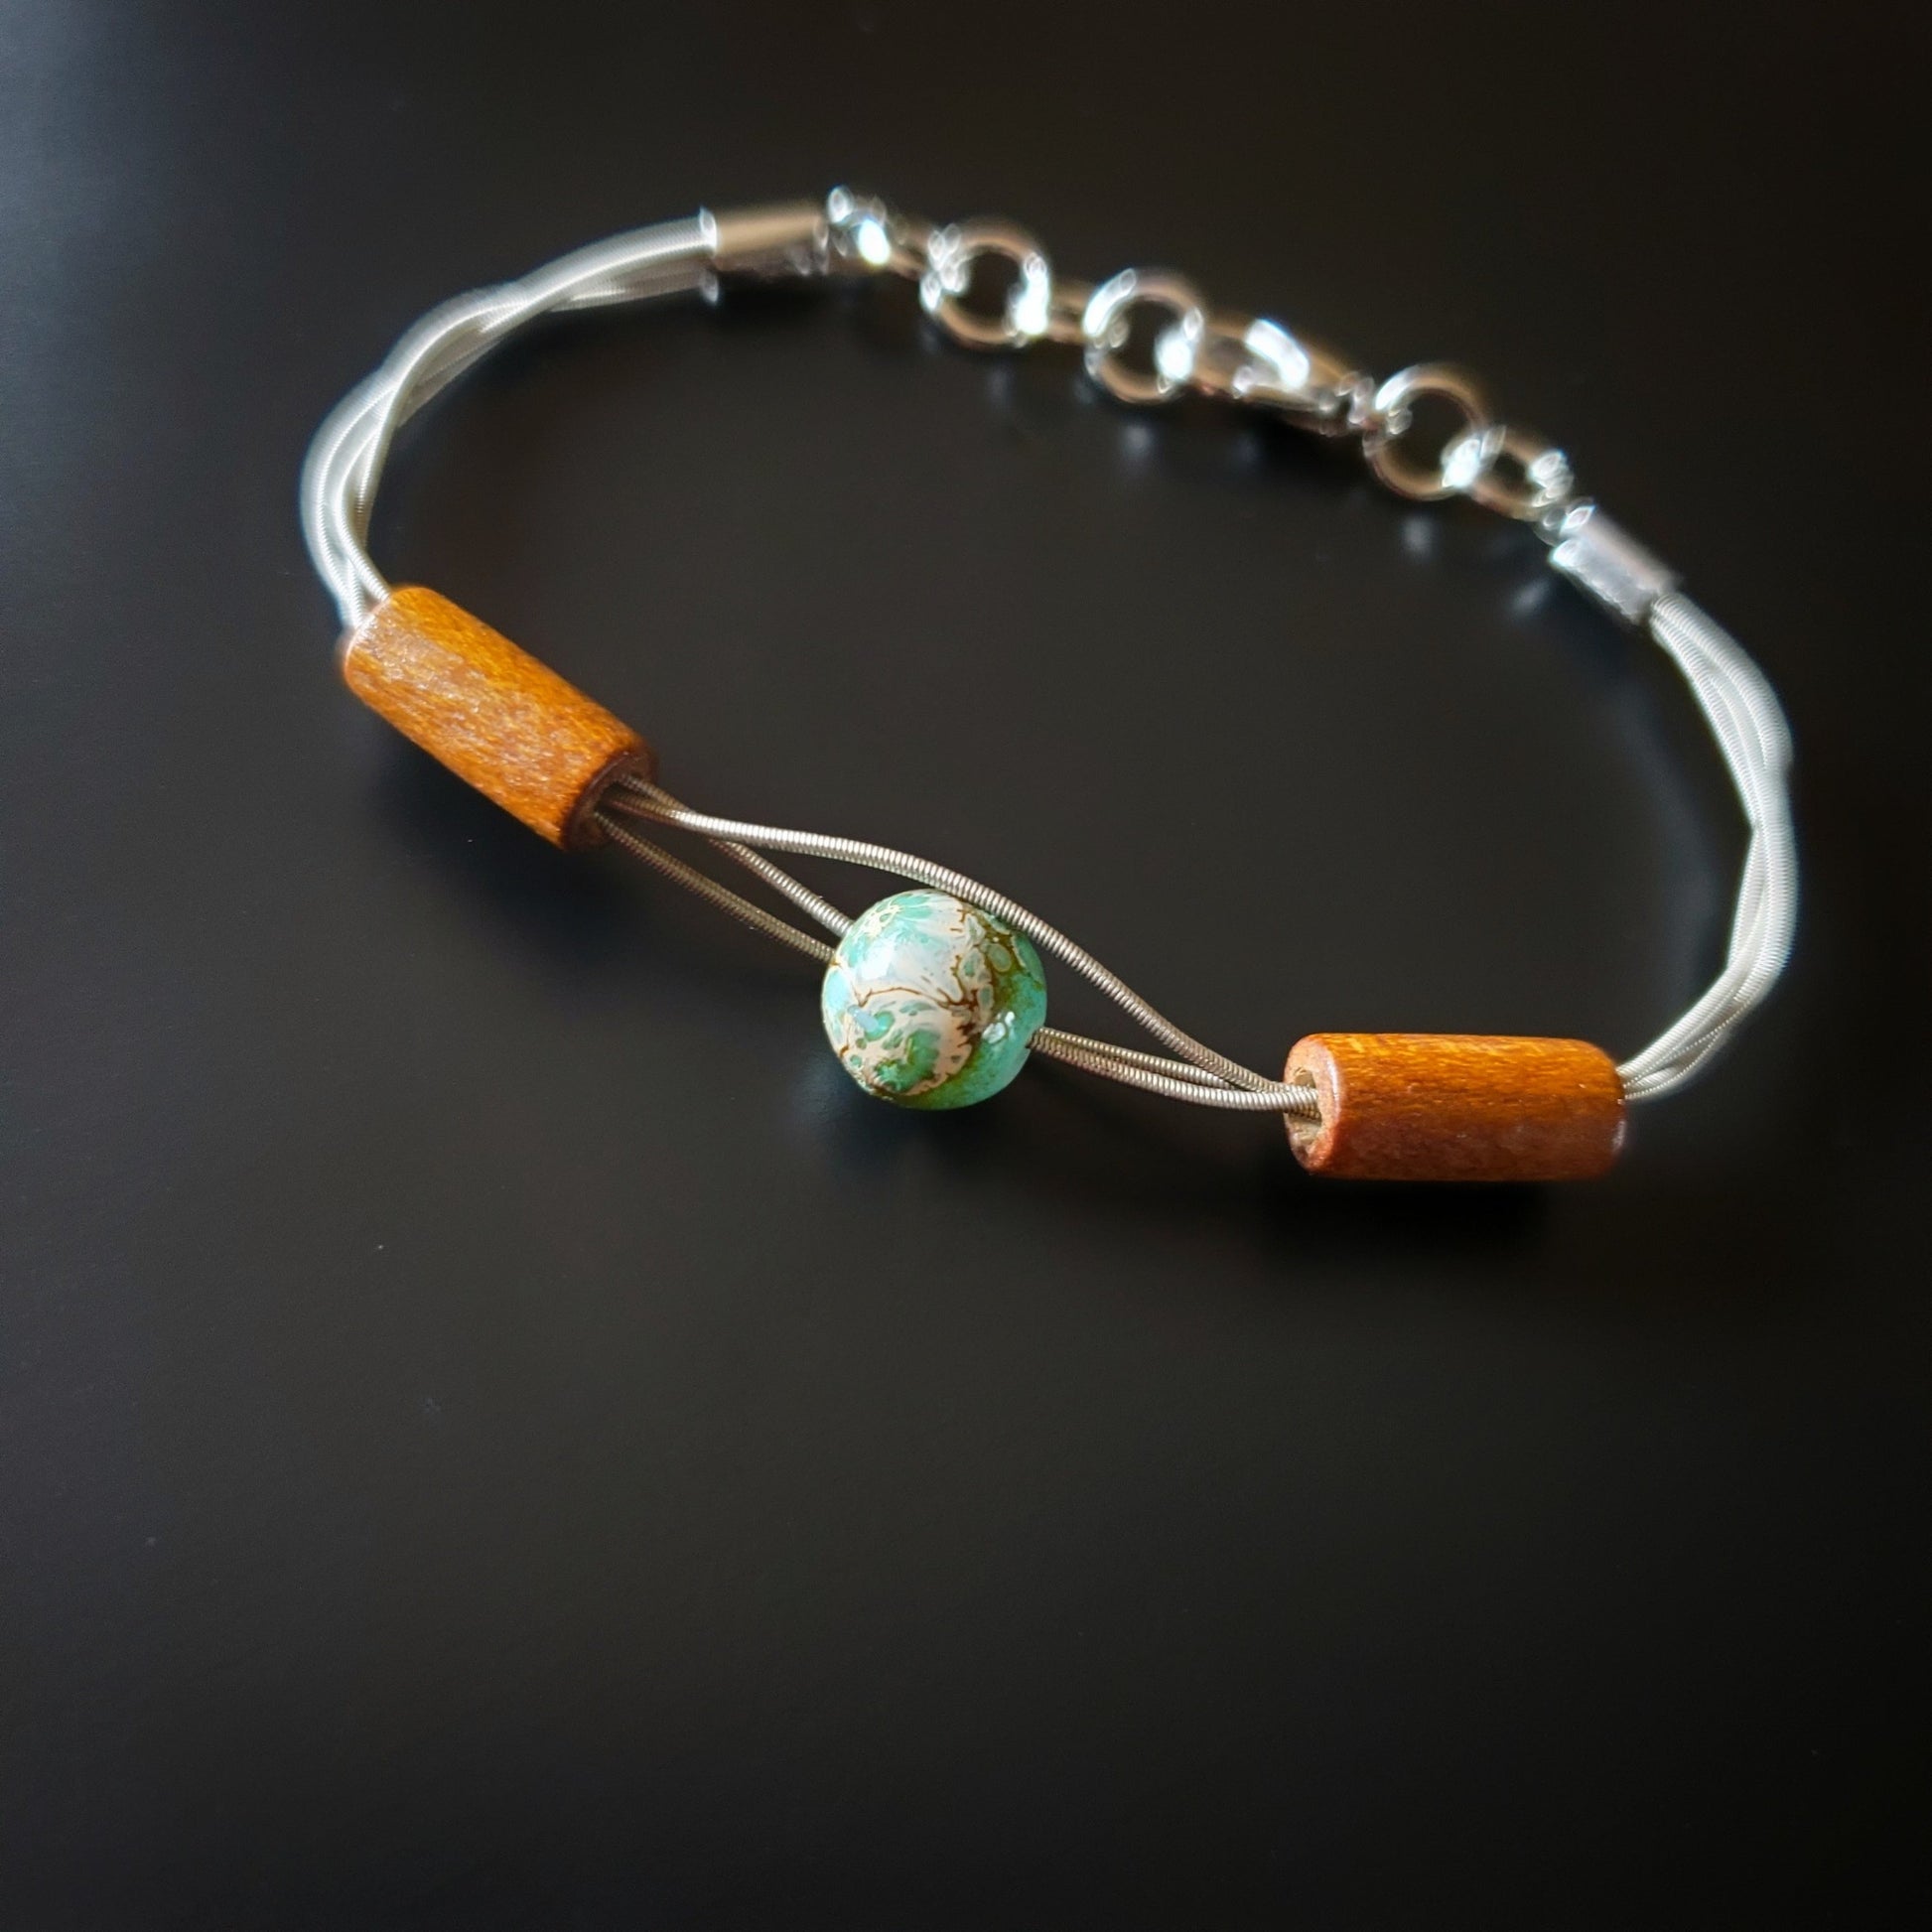 clasp style bracelet made from an upcycled guitar string on which there are two wood bead on either side of a green and gray round bead 